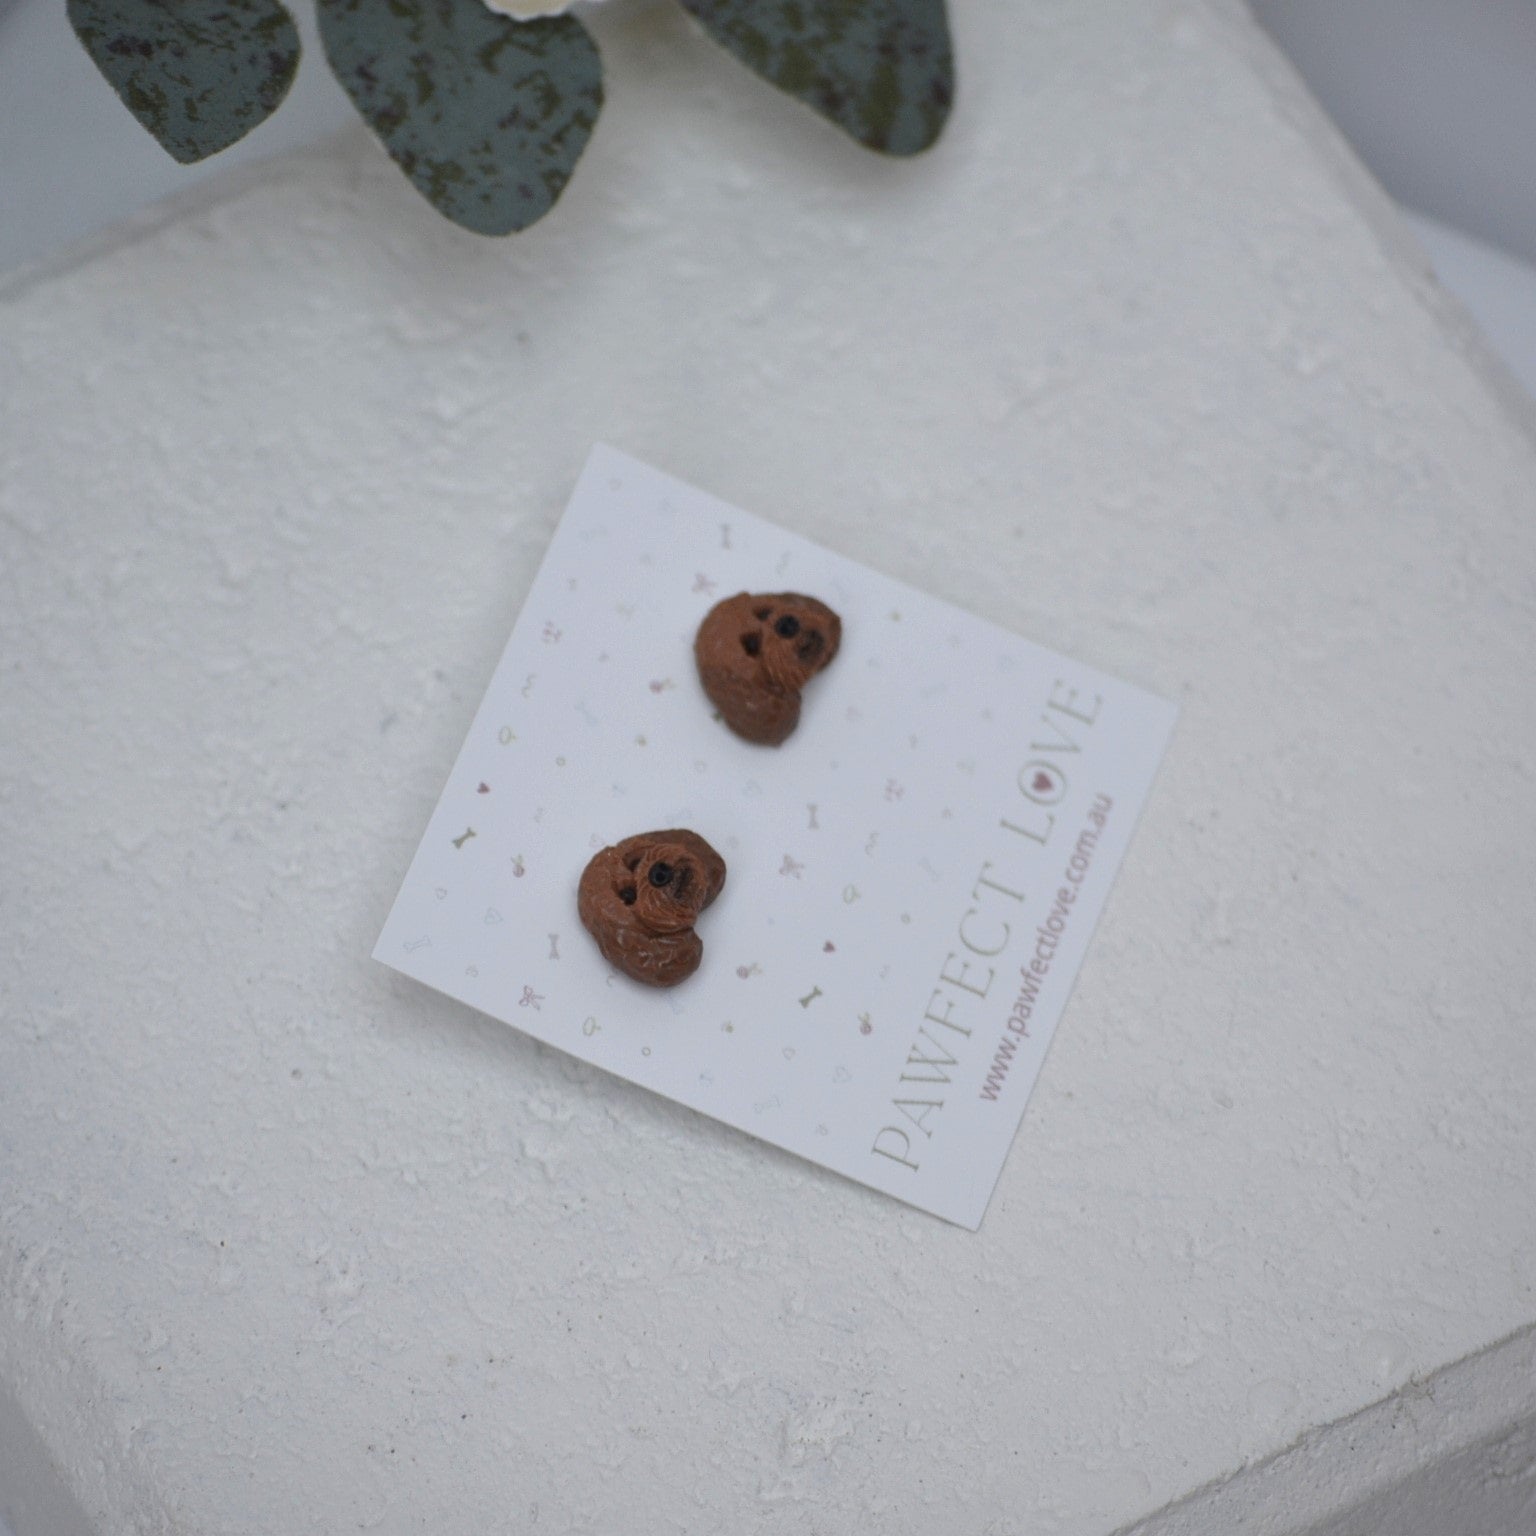 Handmade cavoodle stud earrings by Pawfect Love, positioned in front of white paver